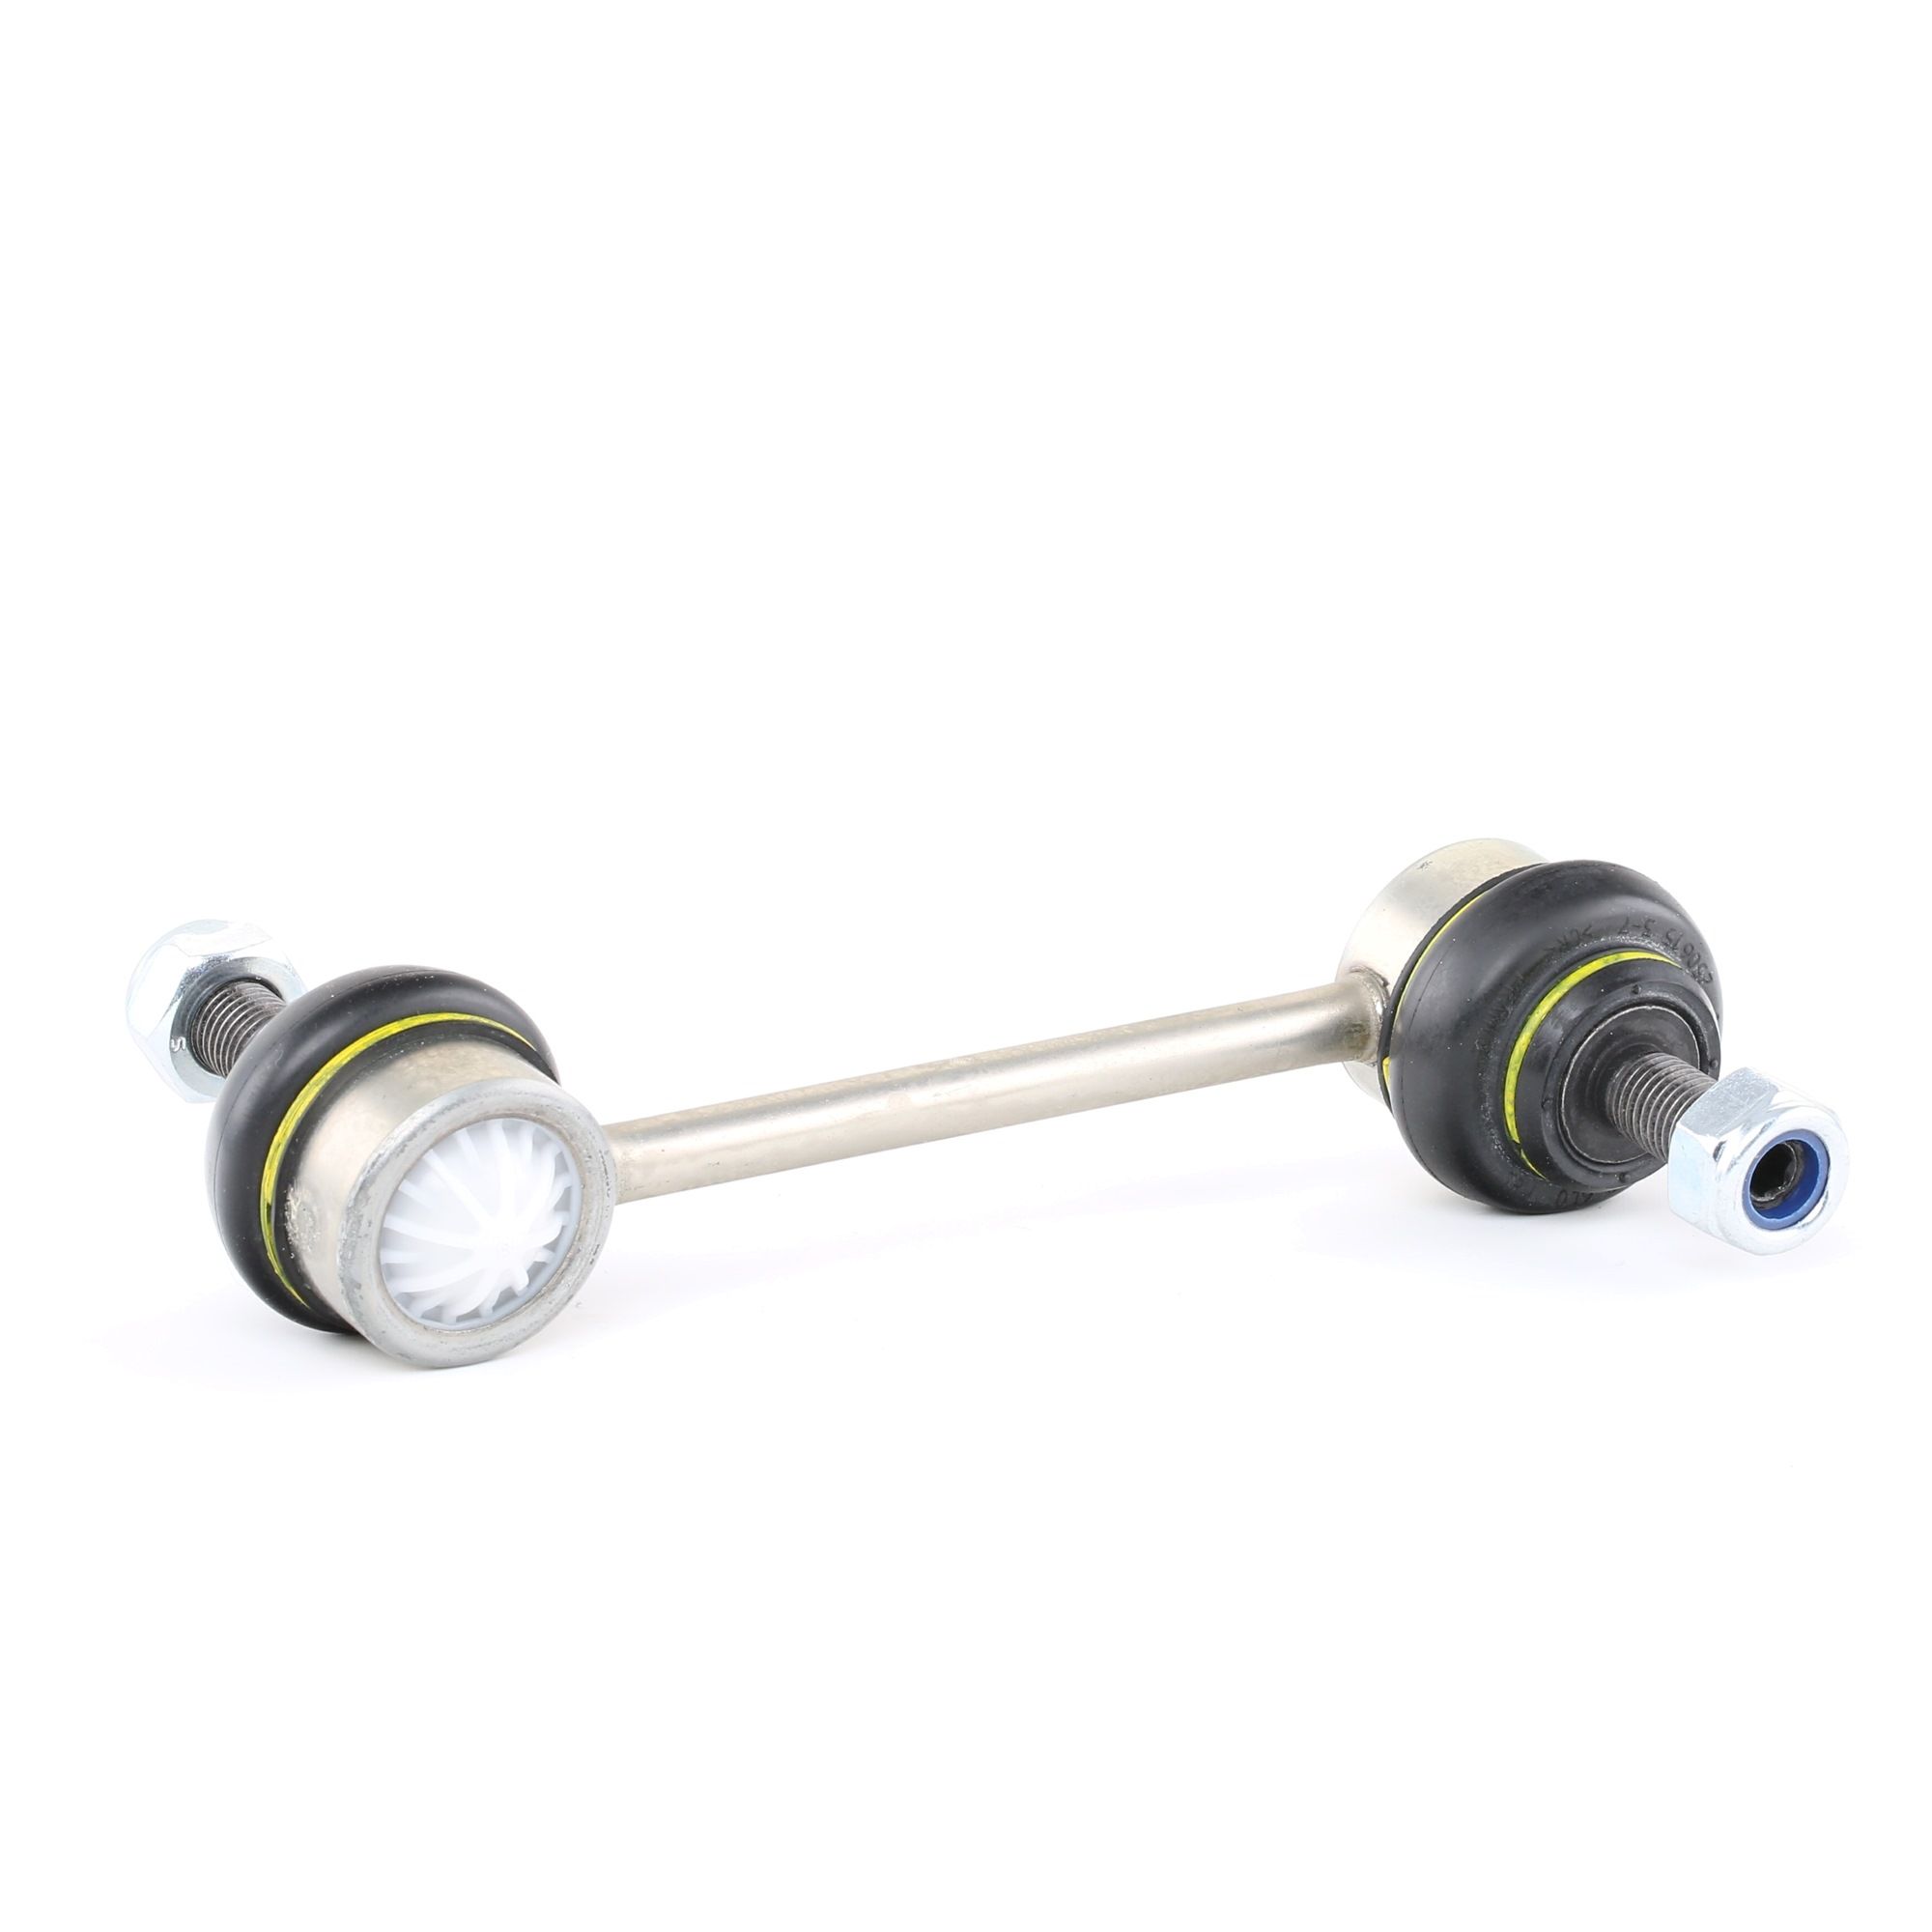 TRW Front Axle, both sides, 125mm, with accessories Length: 125mm Drop link JTS104 buy